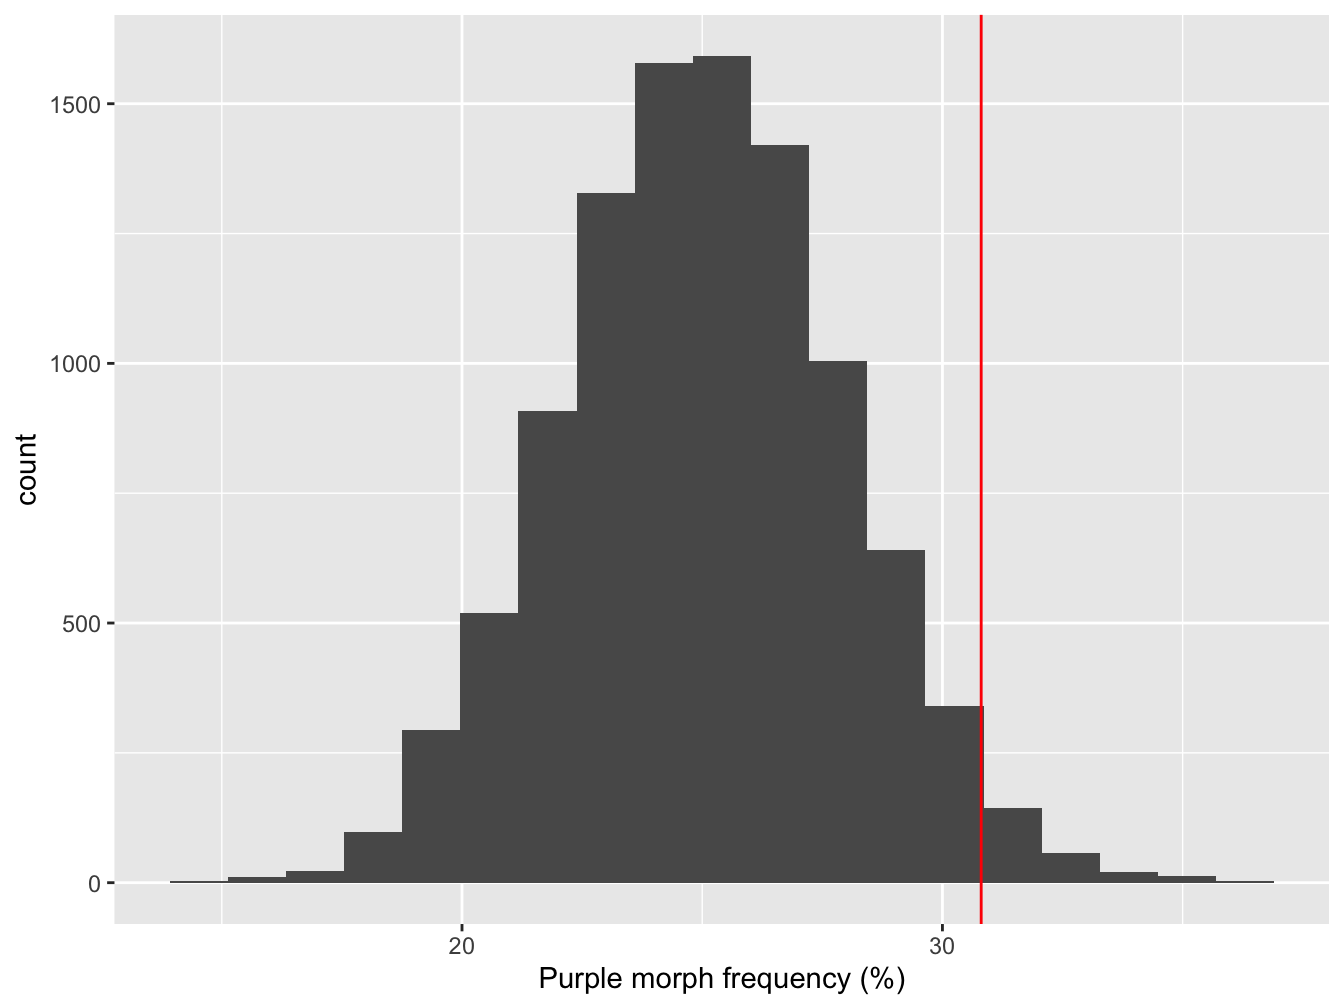 Sampling distribution of purple morph frequency under the null hypothesis